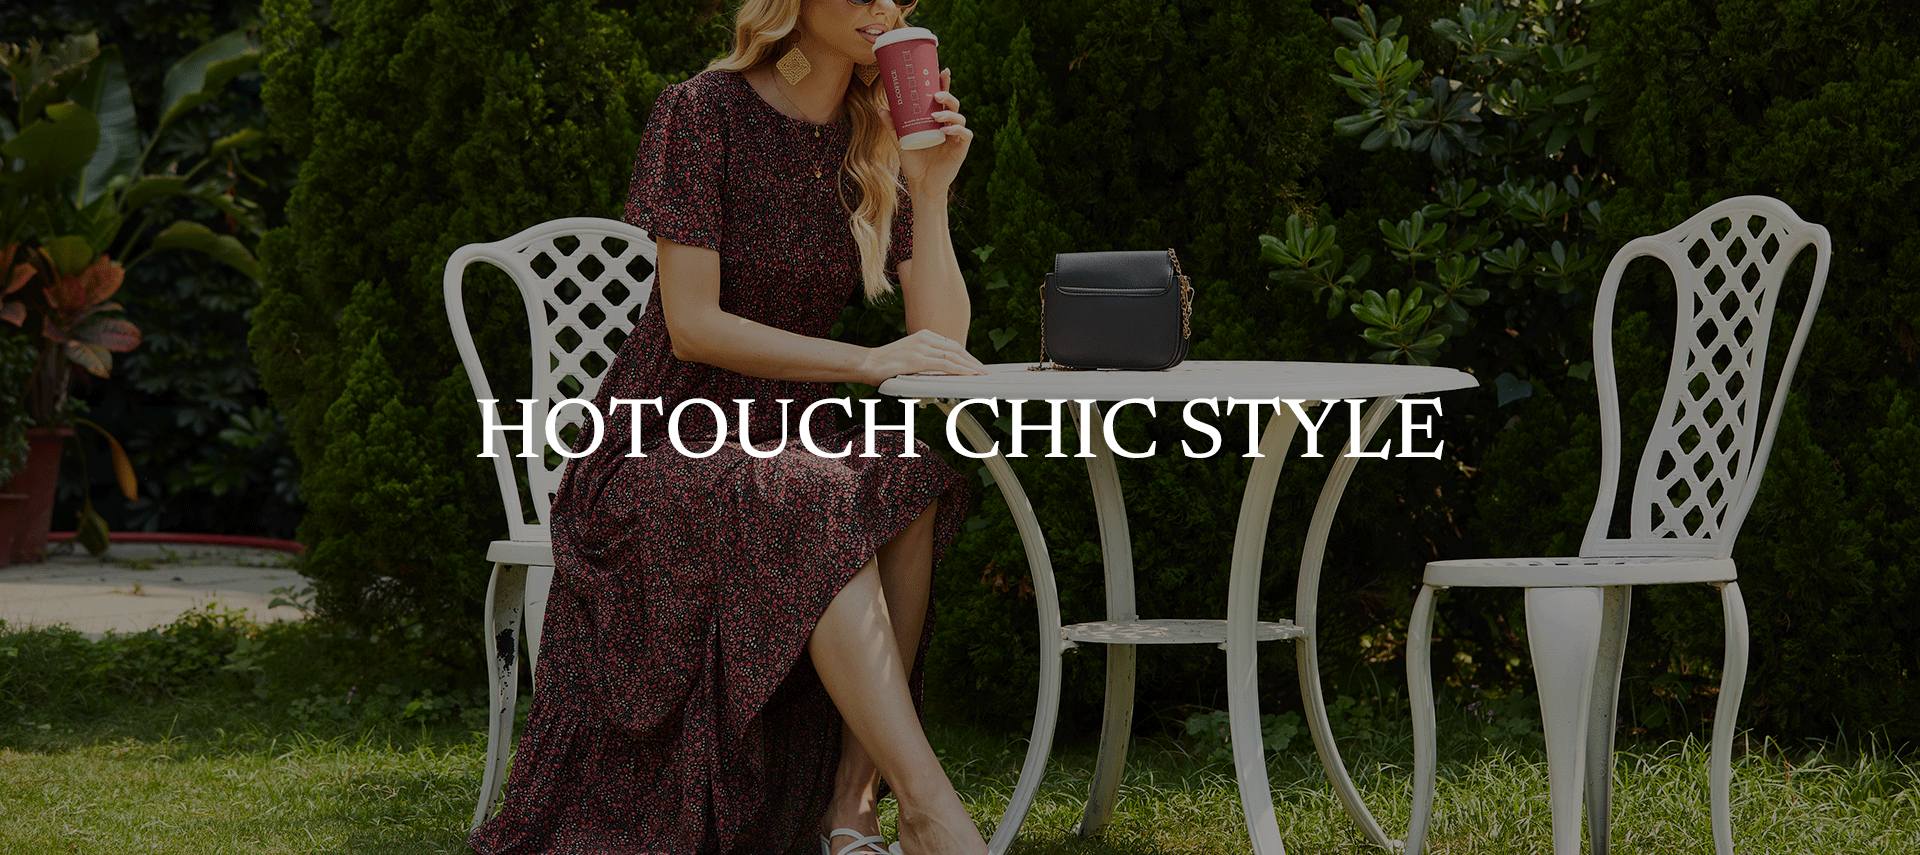 HOTOUCH CHIC STYLE